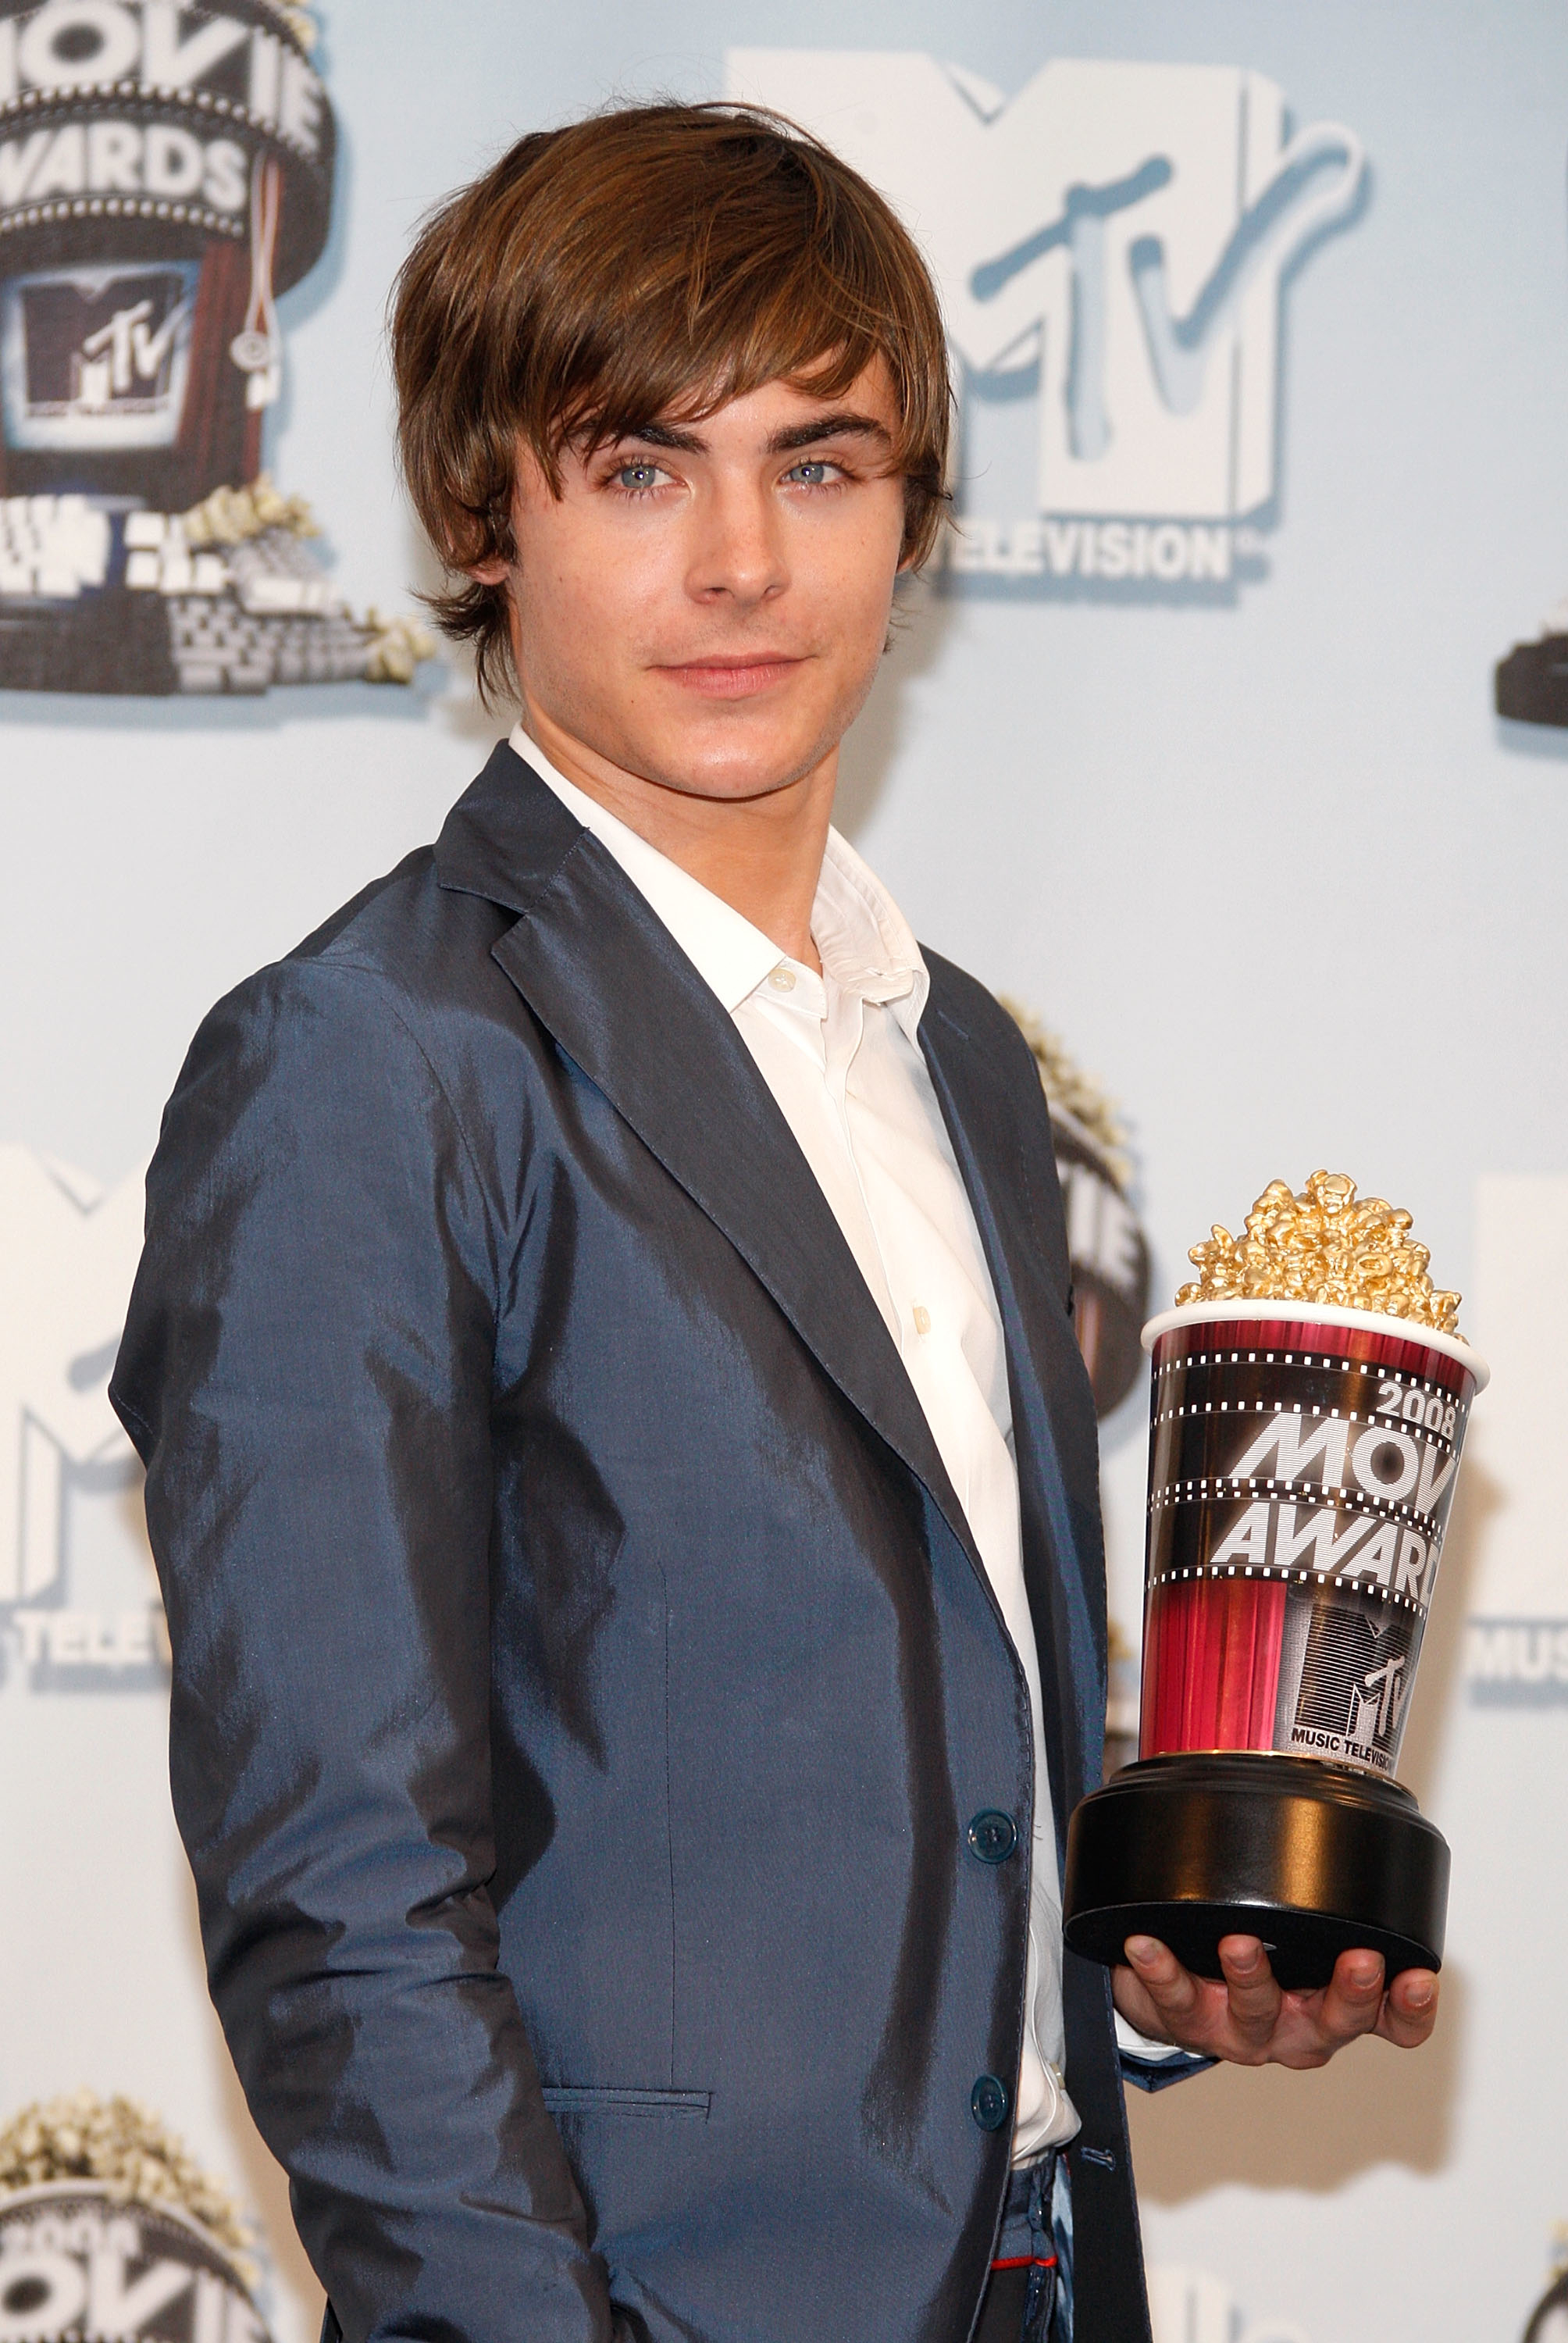 In a suit and holding an MTV Movie Award